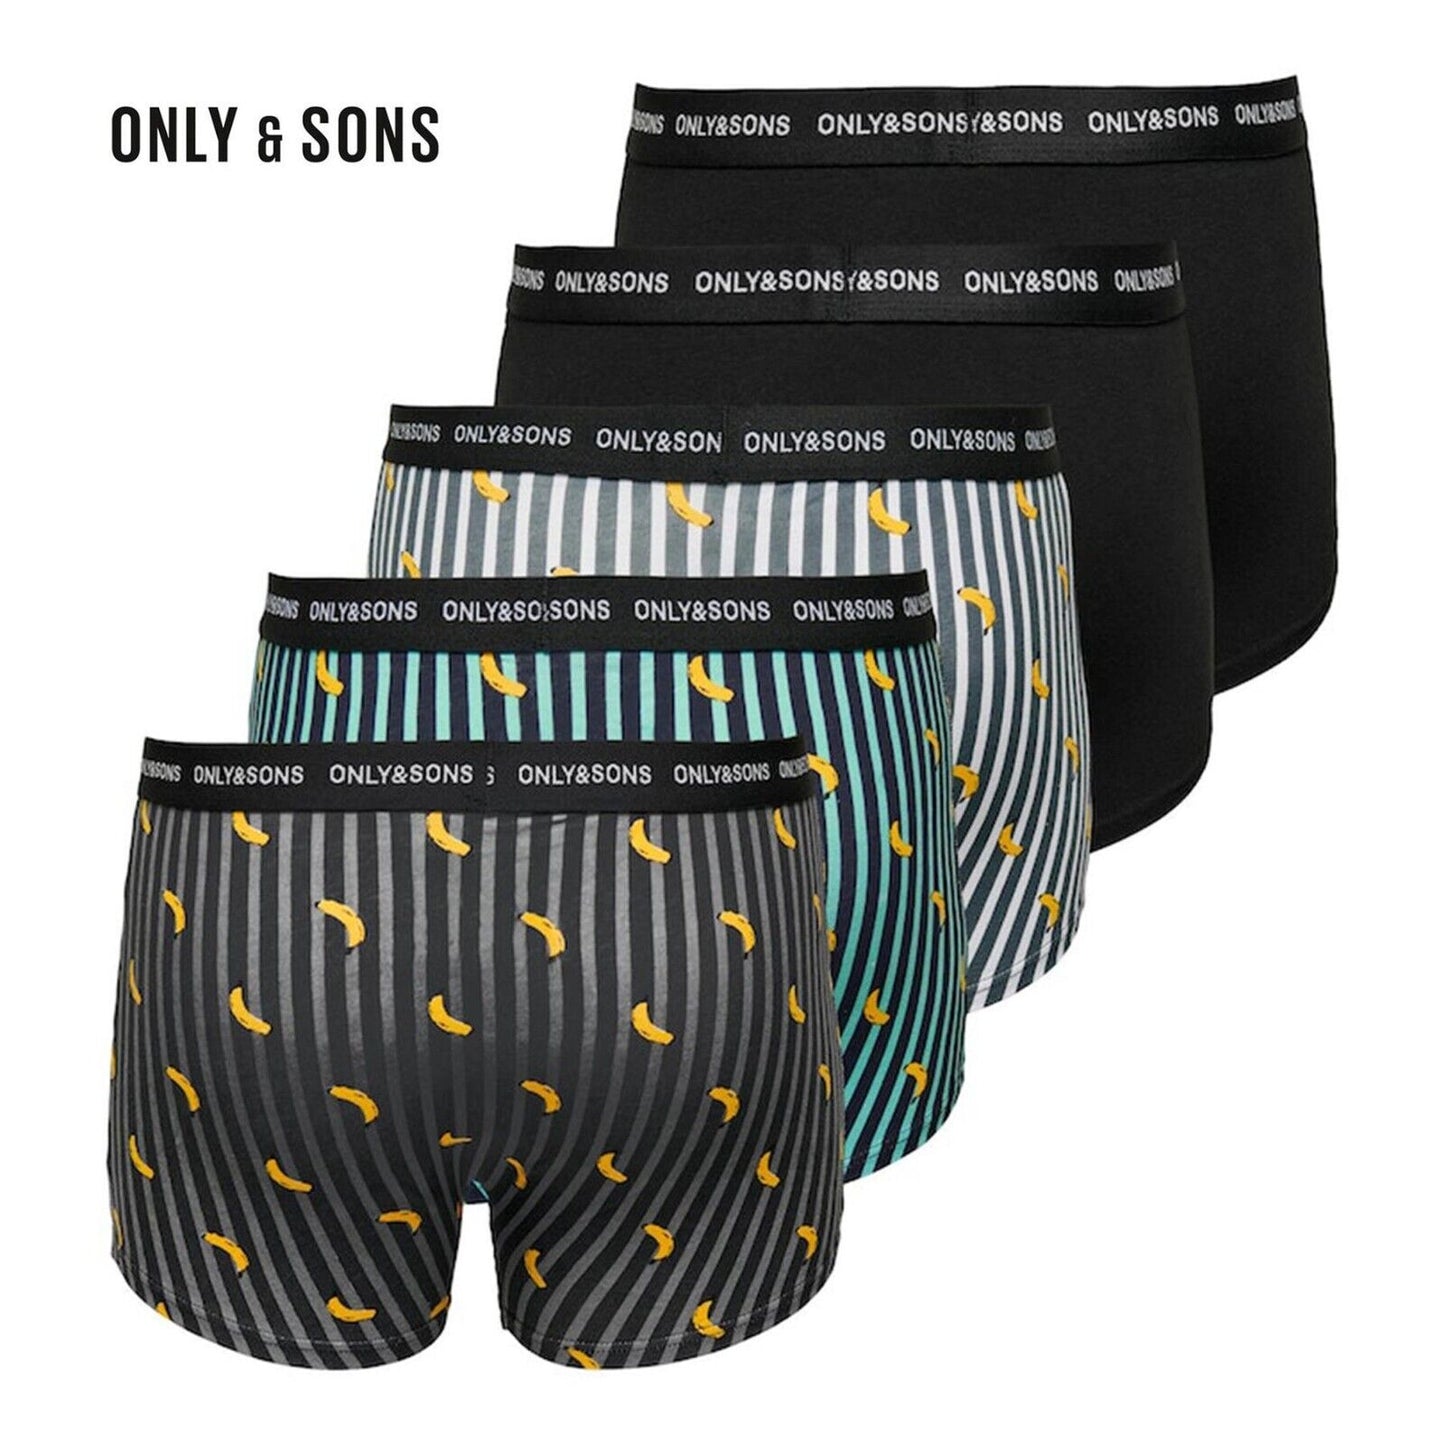 3-12 Pack Mens Boxer Shorts Only & Sons Cotton Underwear Briefs Boxers Multipack